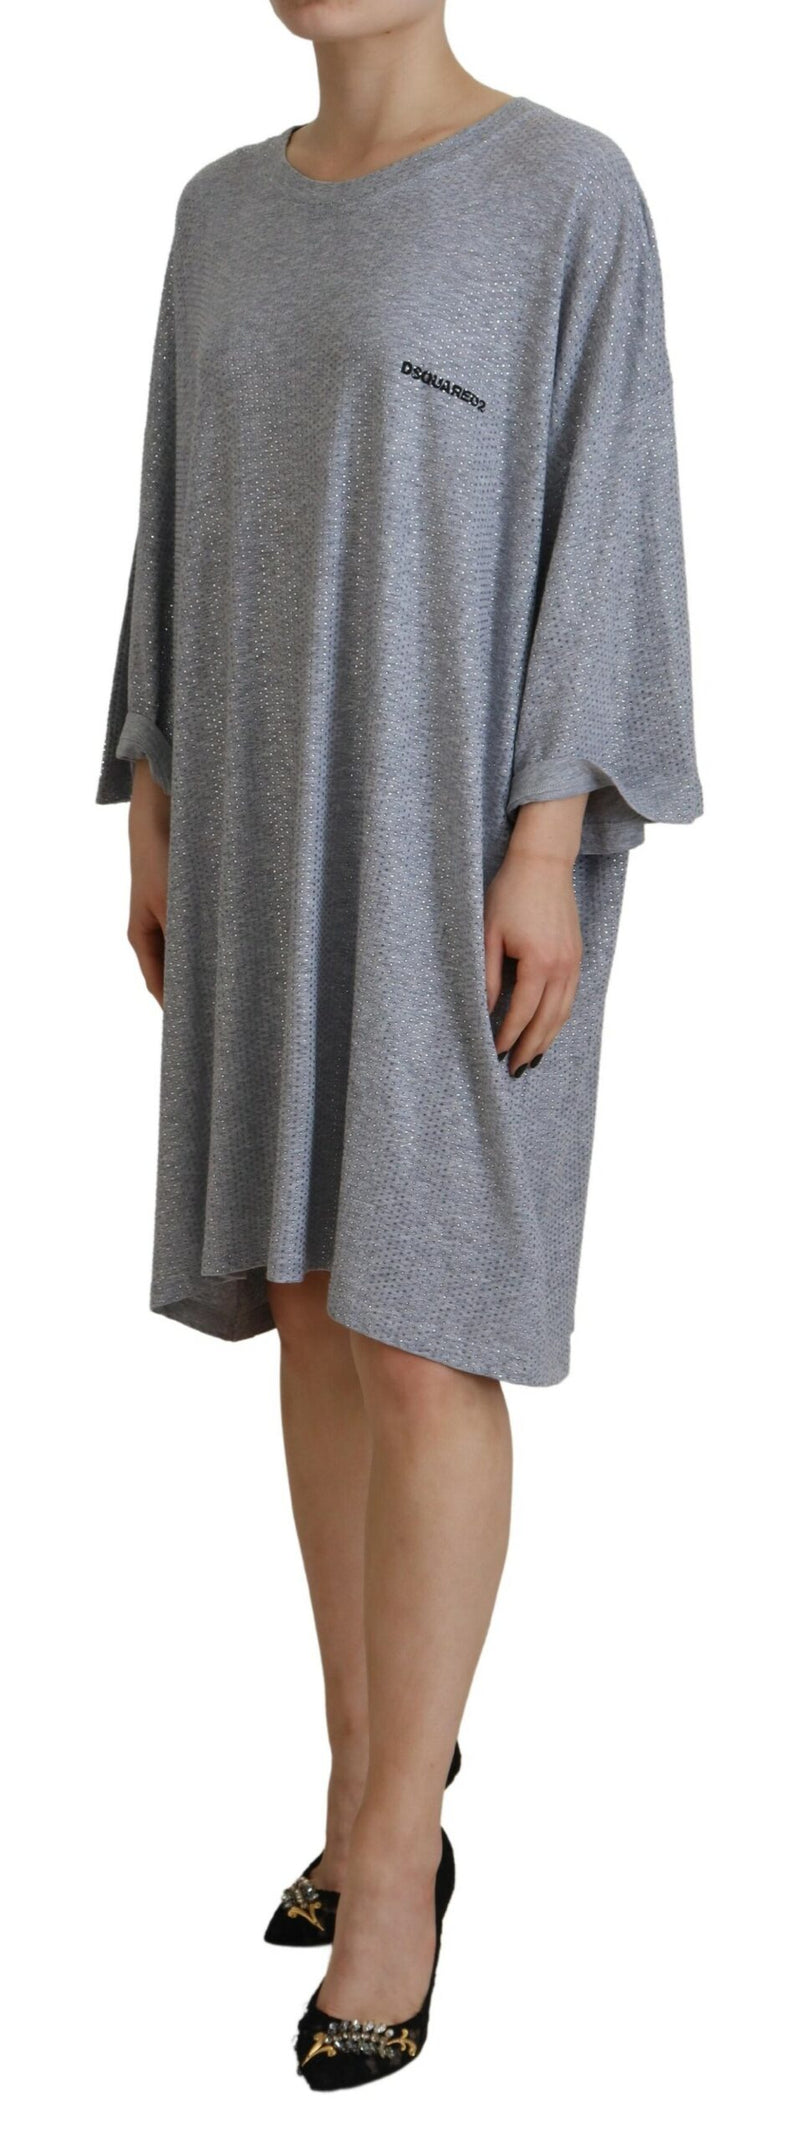 Dsquared² Gray Crystal Embellished Cotton Long Sleeves Dress